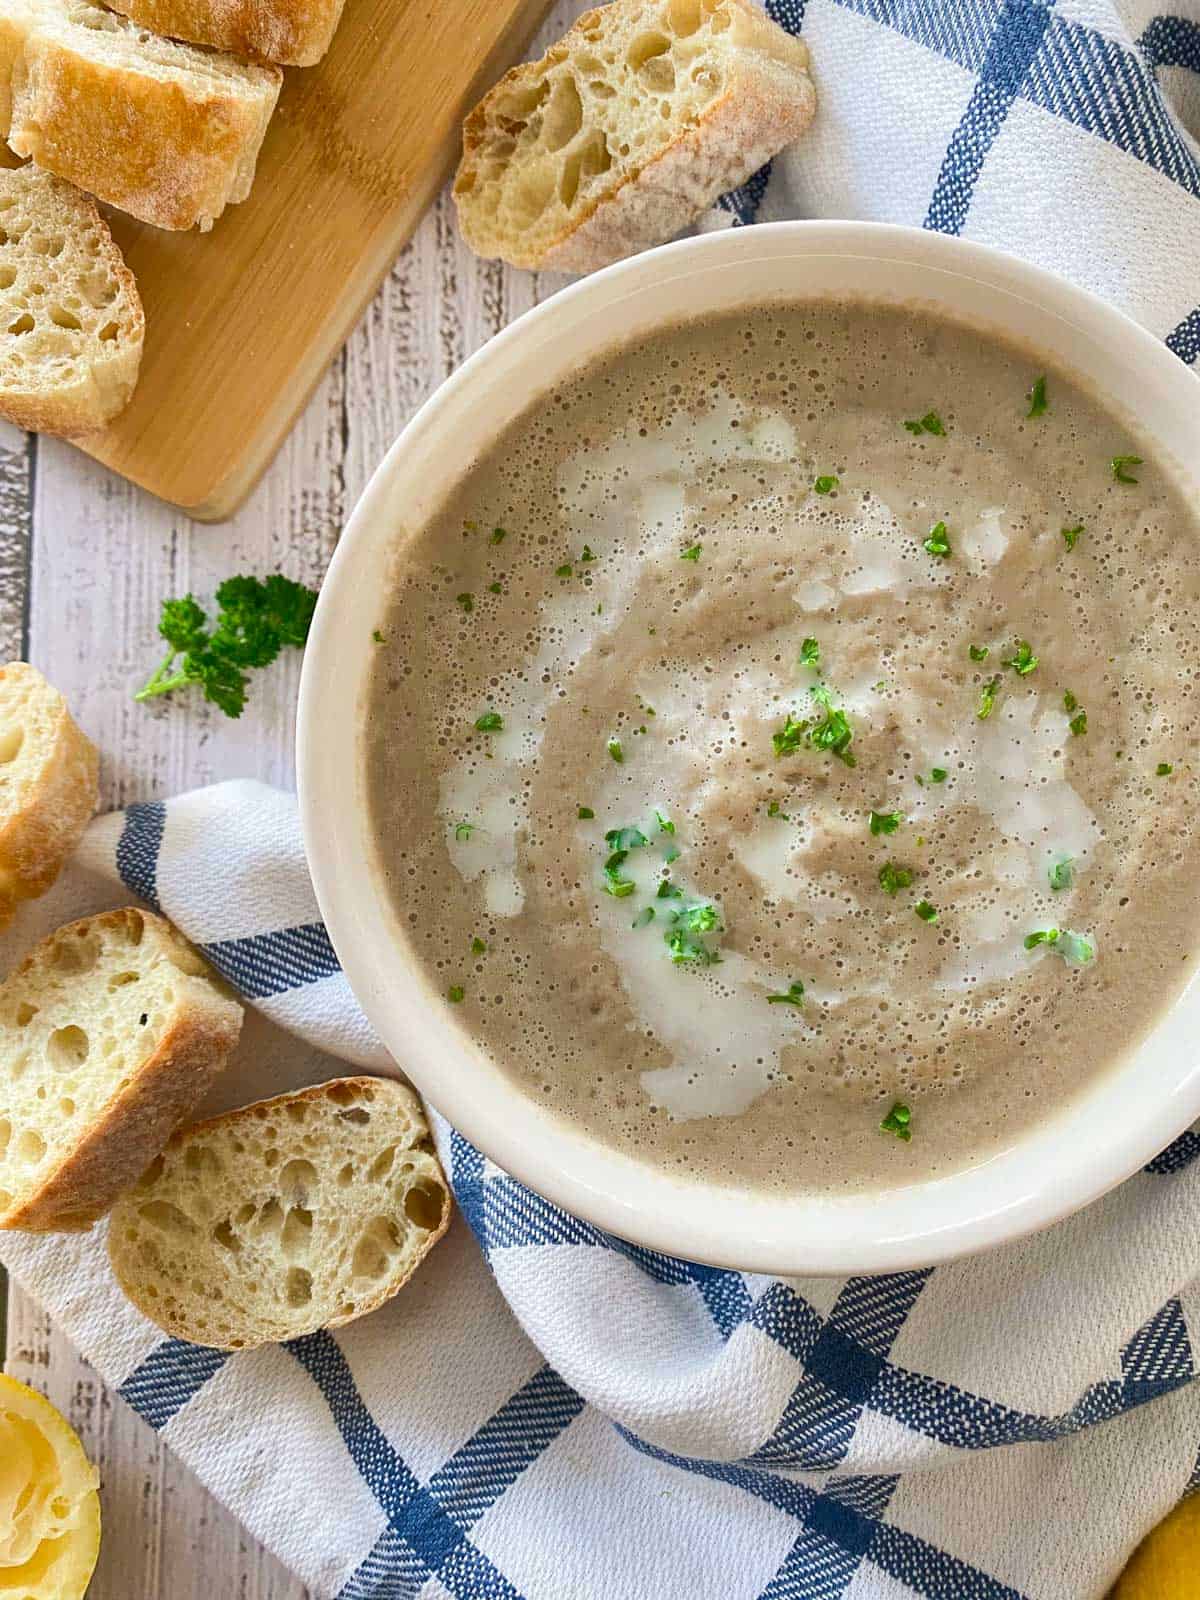 Bowl of creamy mushroom soup with baguette slices around the bowl.